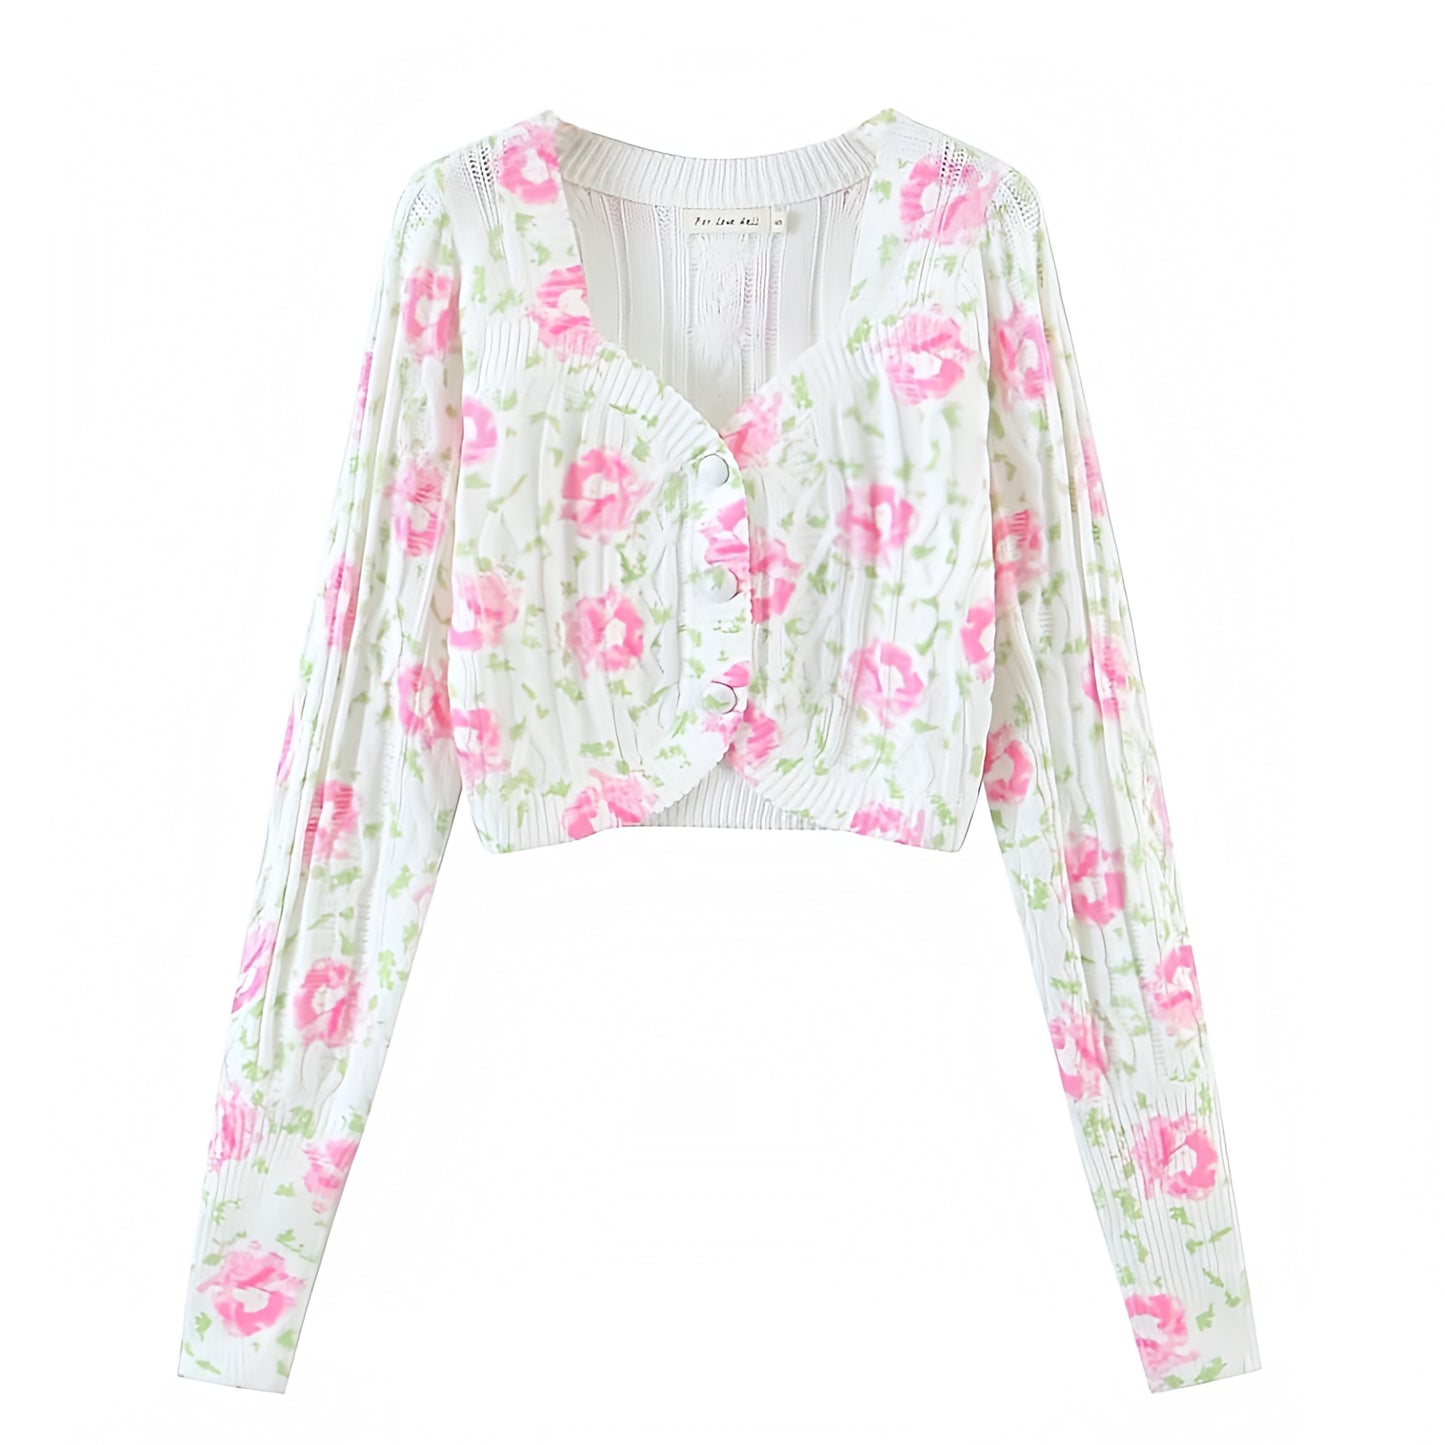 floral-print-pink-and-white-multi-color-flower-patterned-v-neck-cable-knit-crochet-long-sleeve-button-down-crop-cardigan-sweater-sweatshirt-coat-cotton-pastel-spring-2024-summer-chic-trendy-women-ladies-elegant-semi-formal-classy-preppy-style-feminine-zara-revolve-loveshackfancy-urban-outfitters-brandy-melville